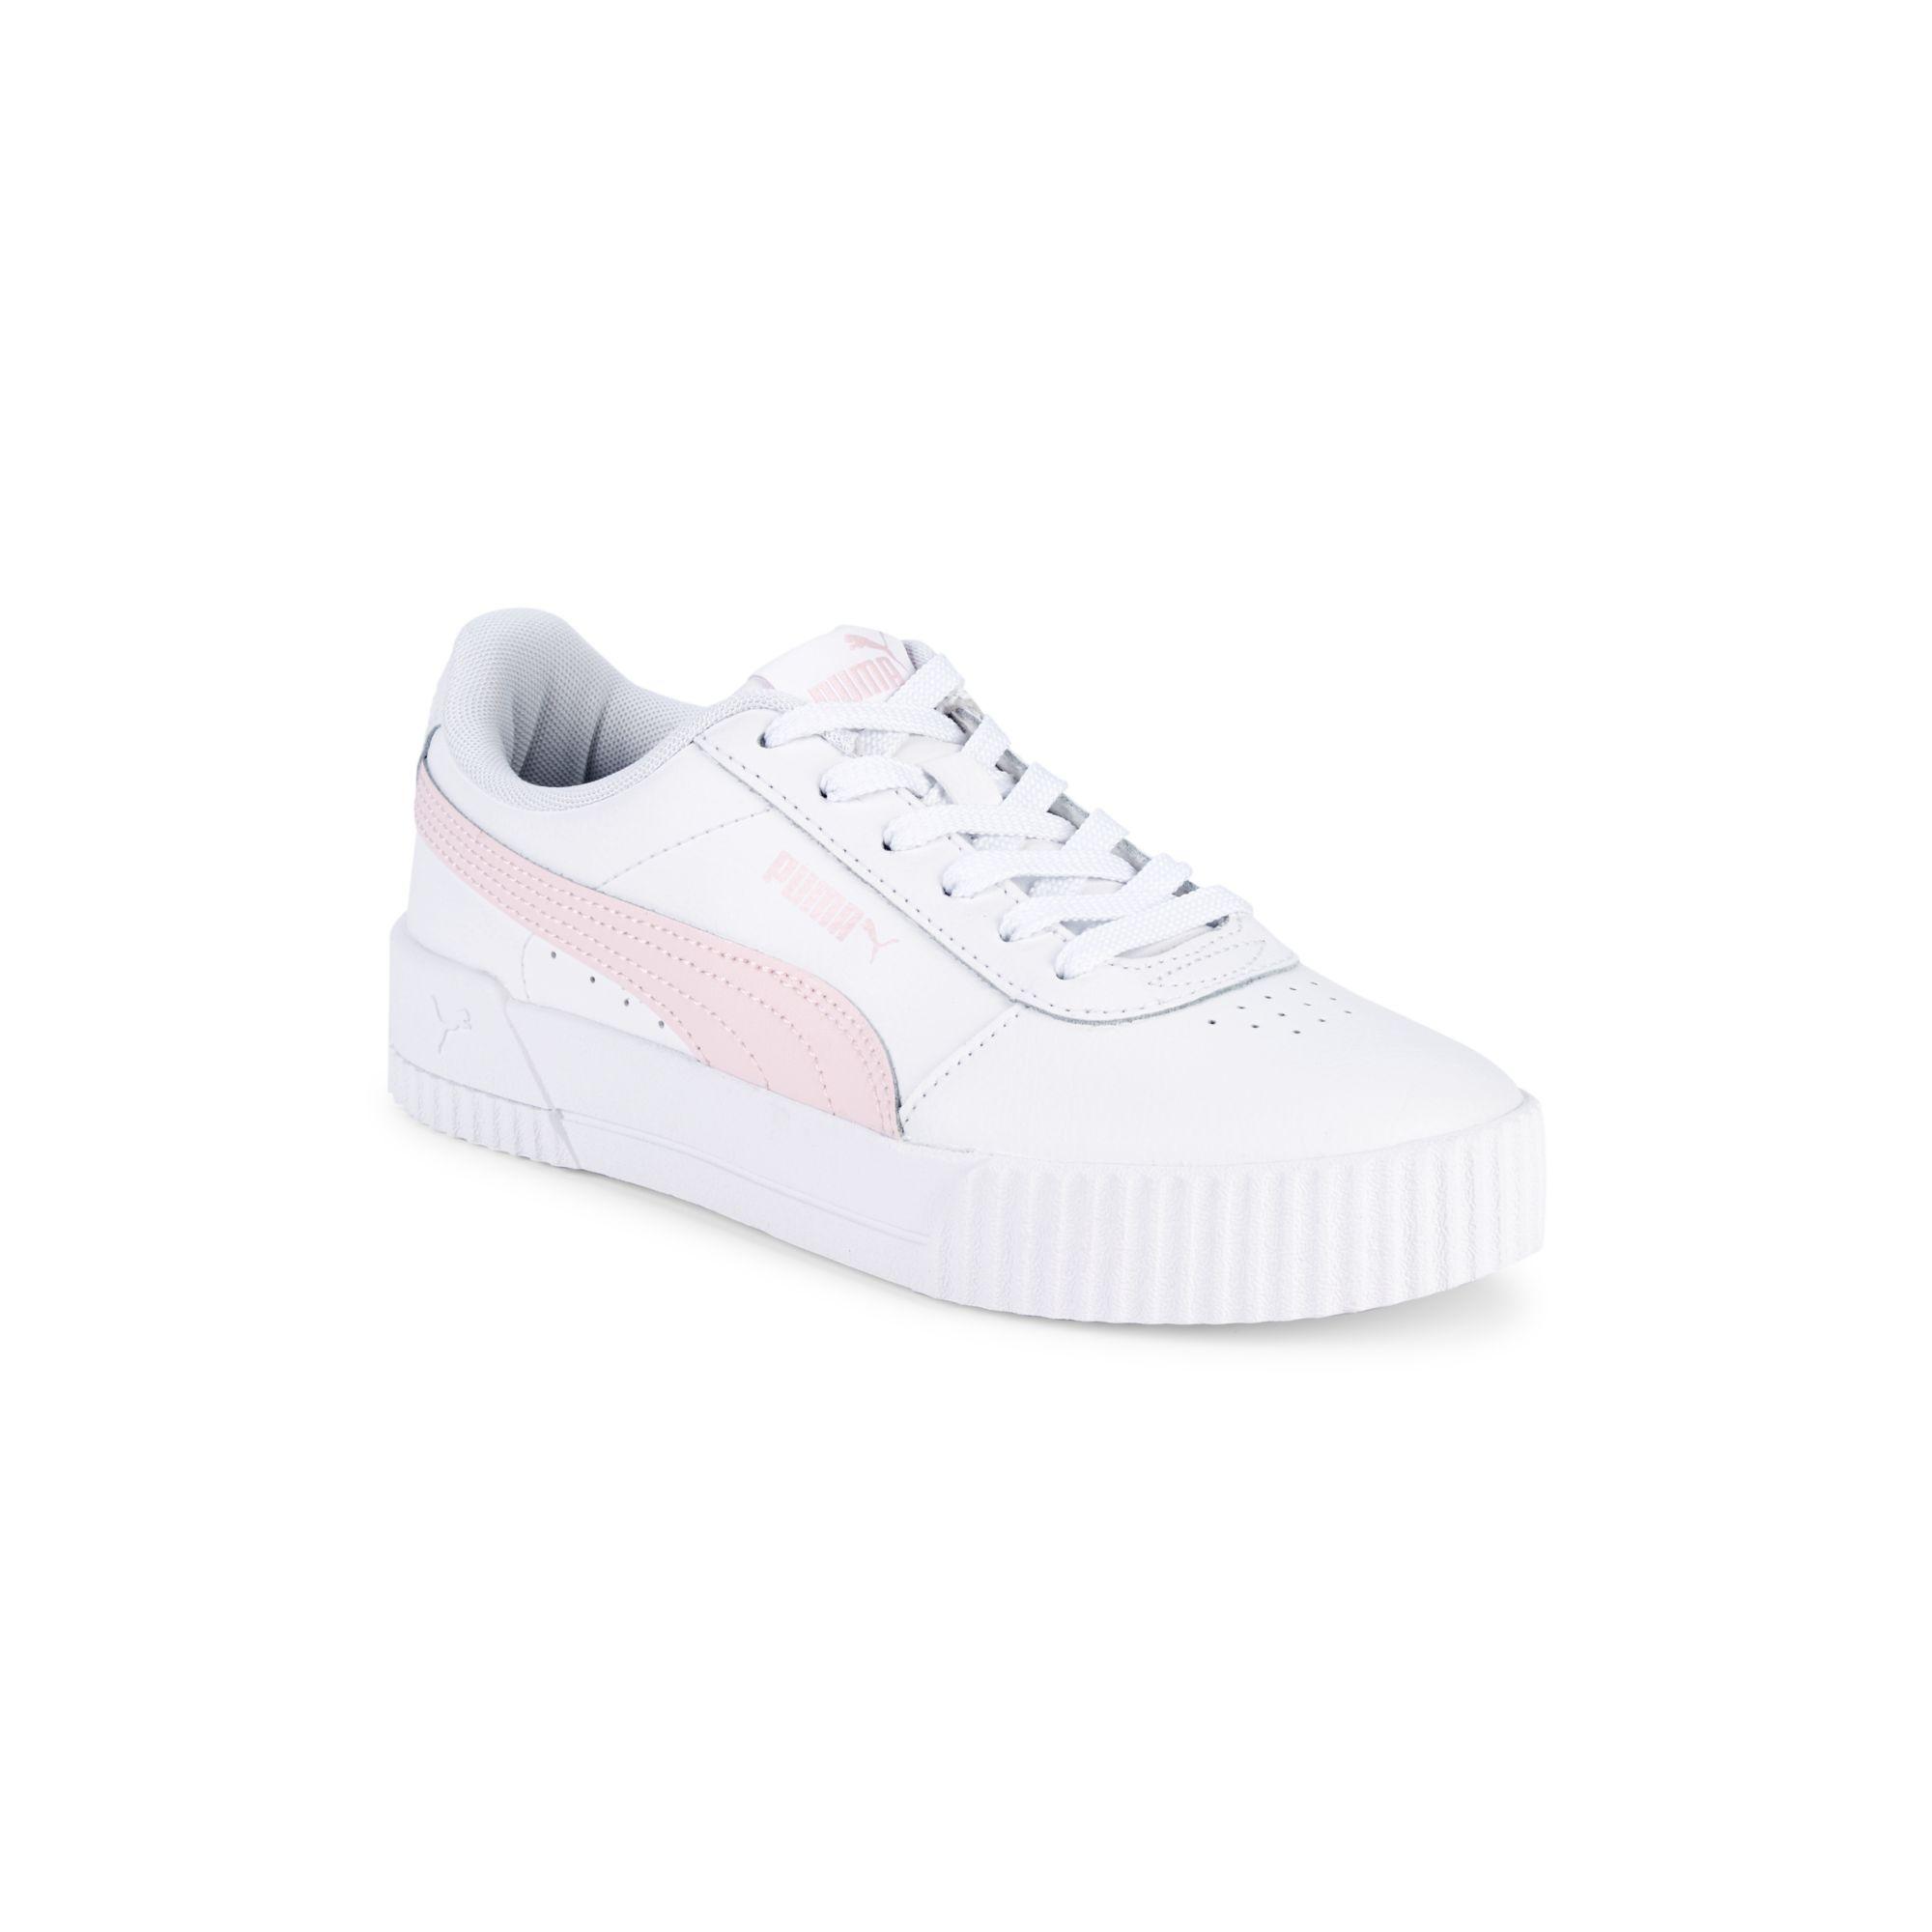 PUMA Carina Leather Sneakers in White - Lyst